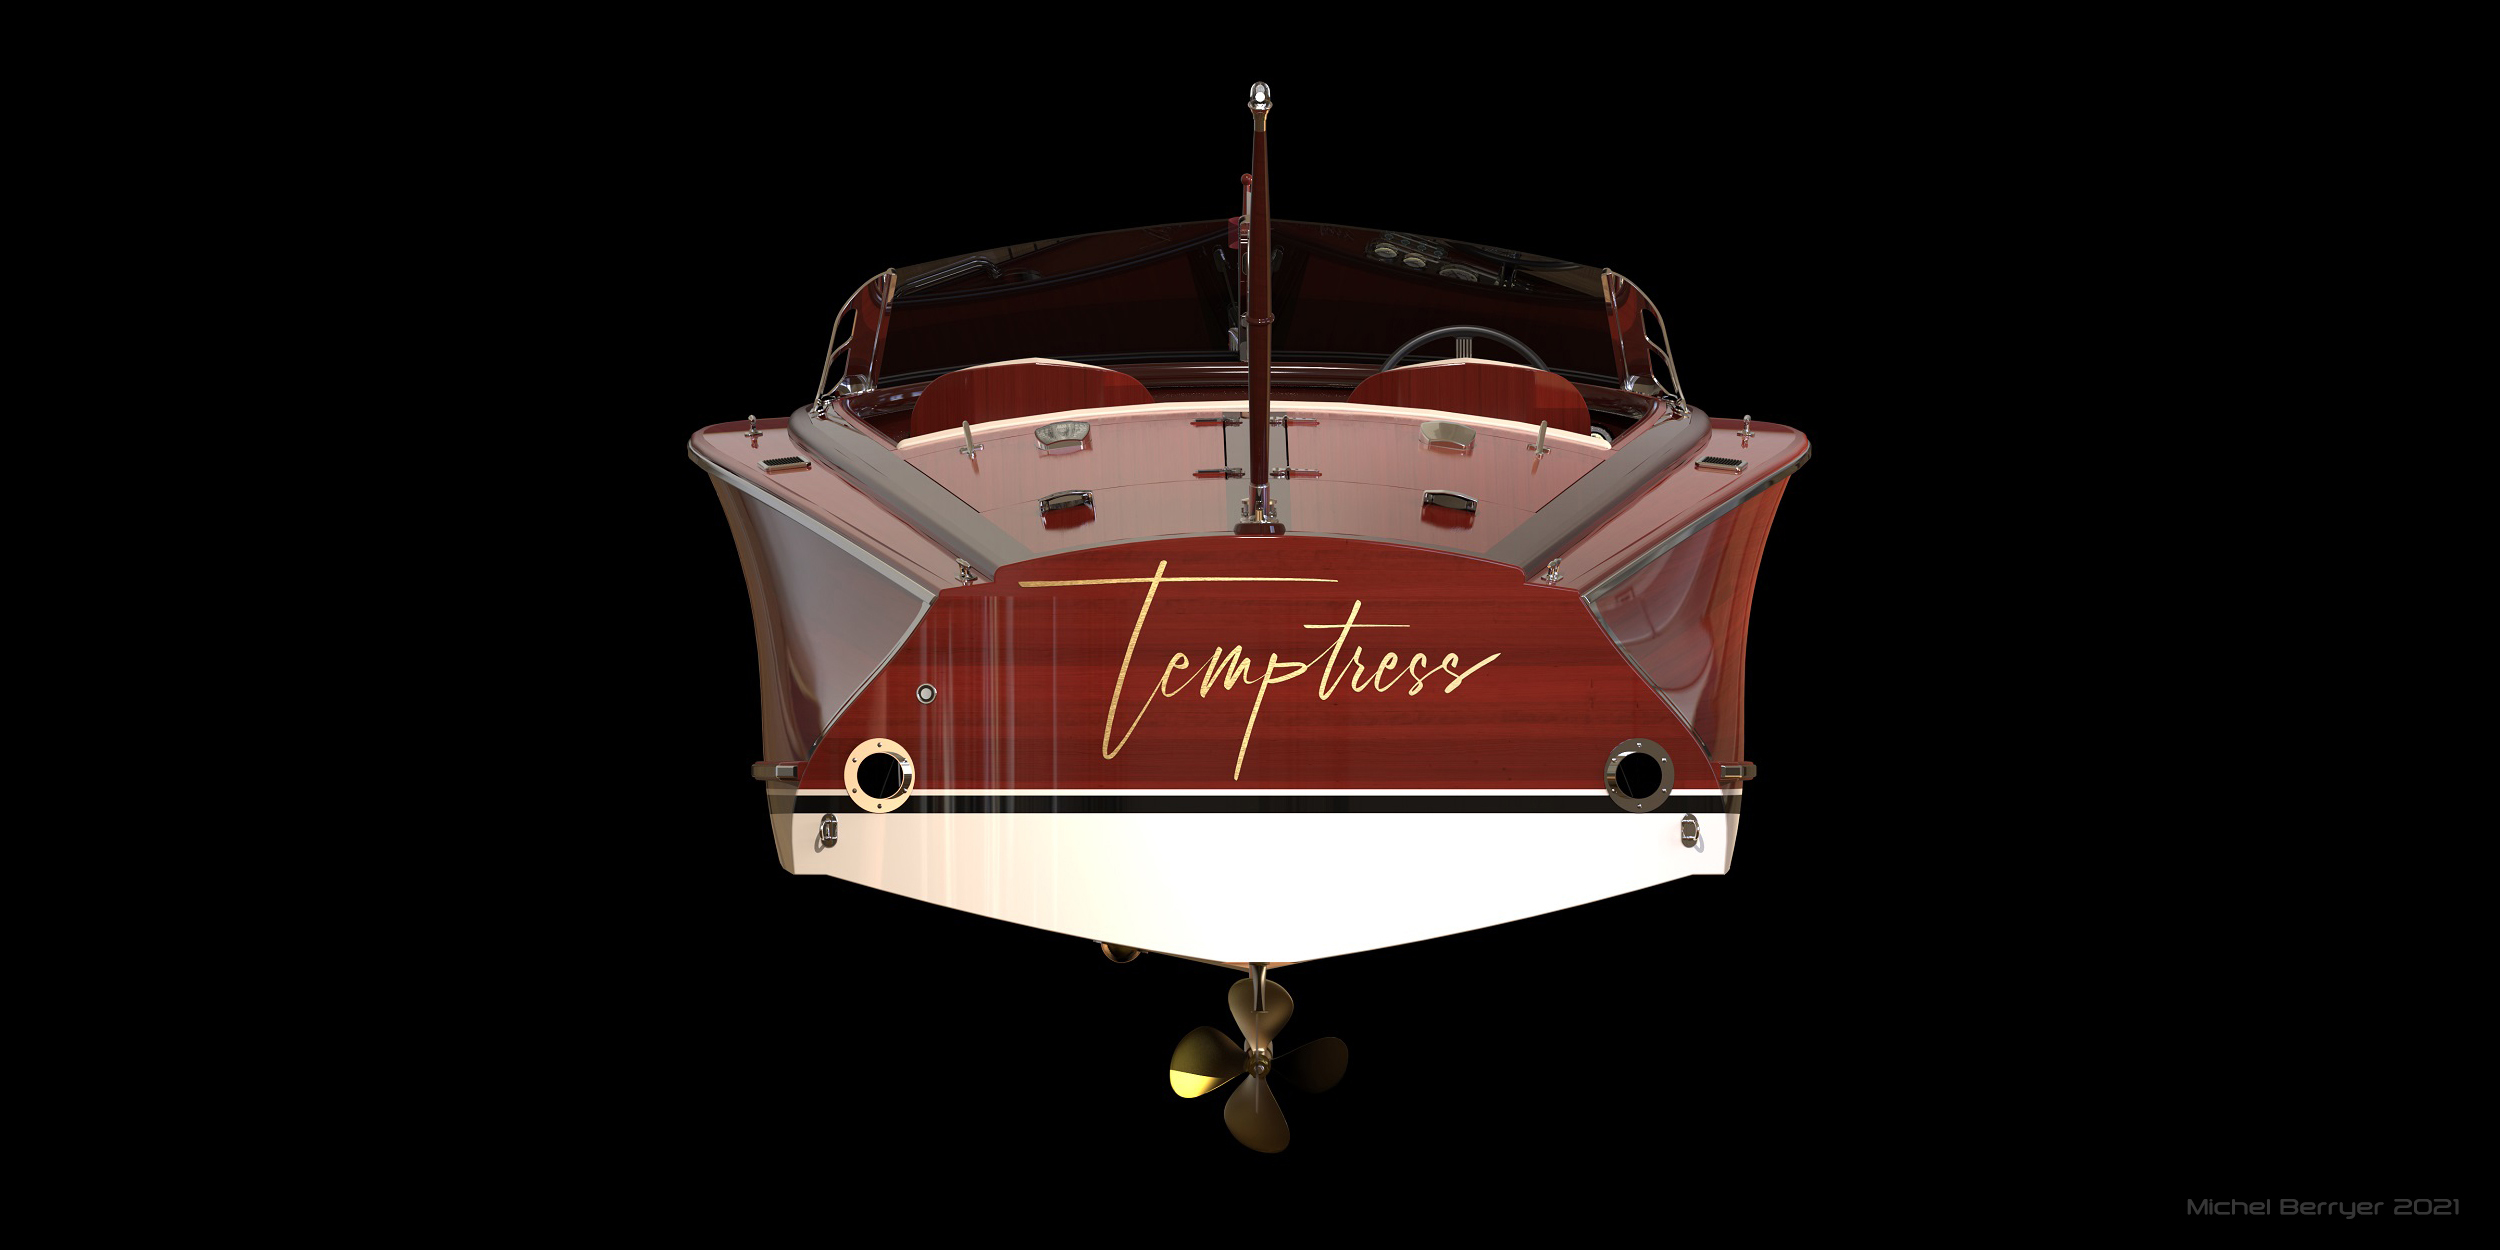 The Temptress Design Phase Draws to a Close